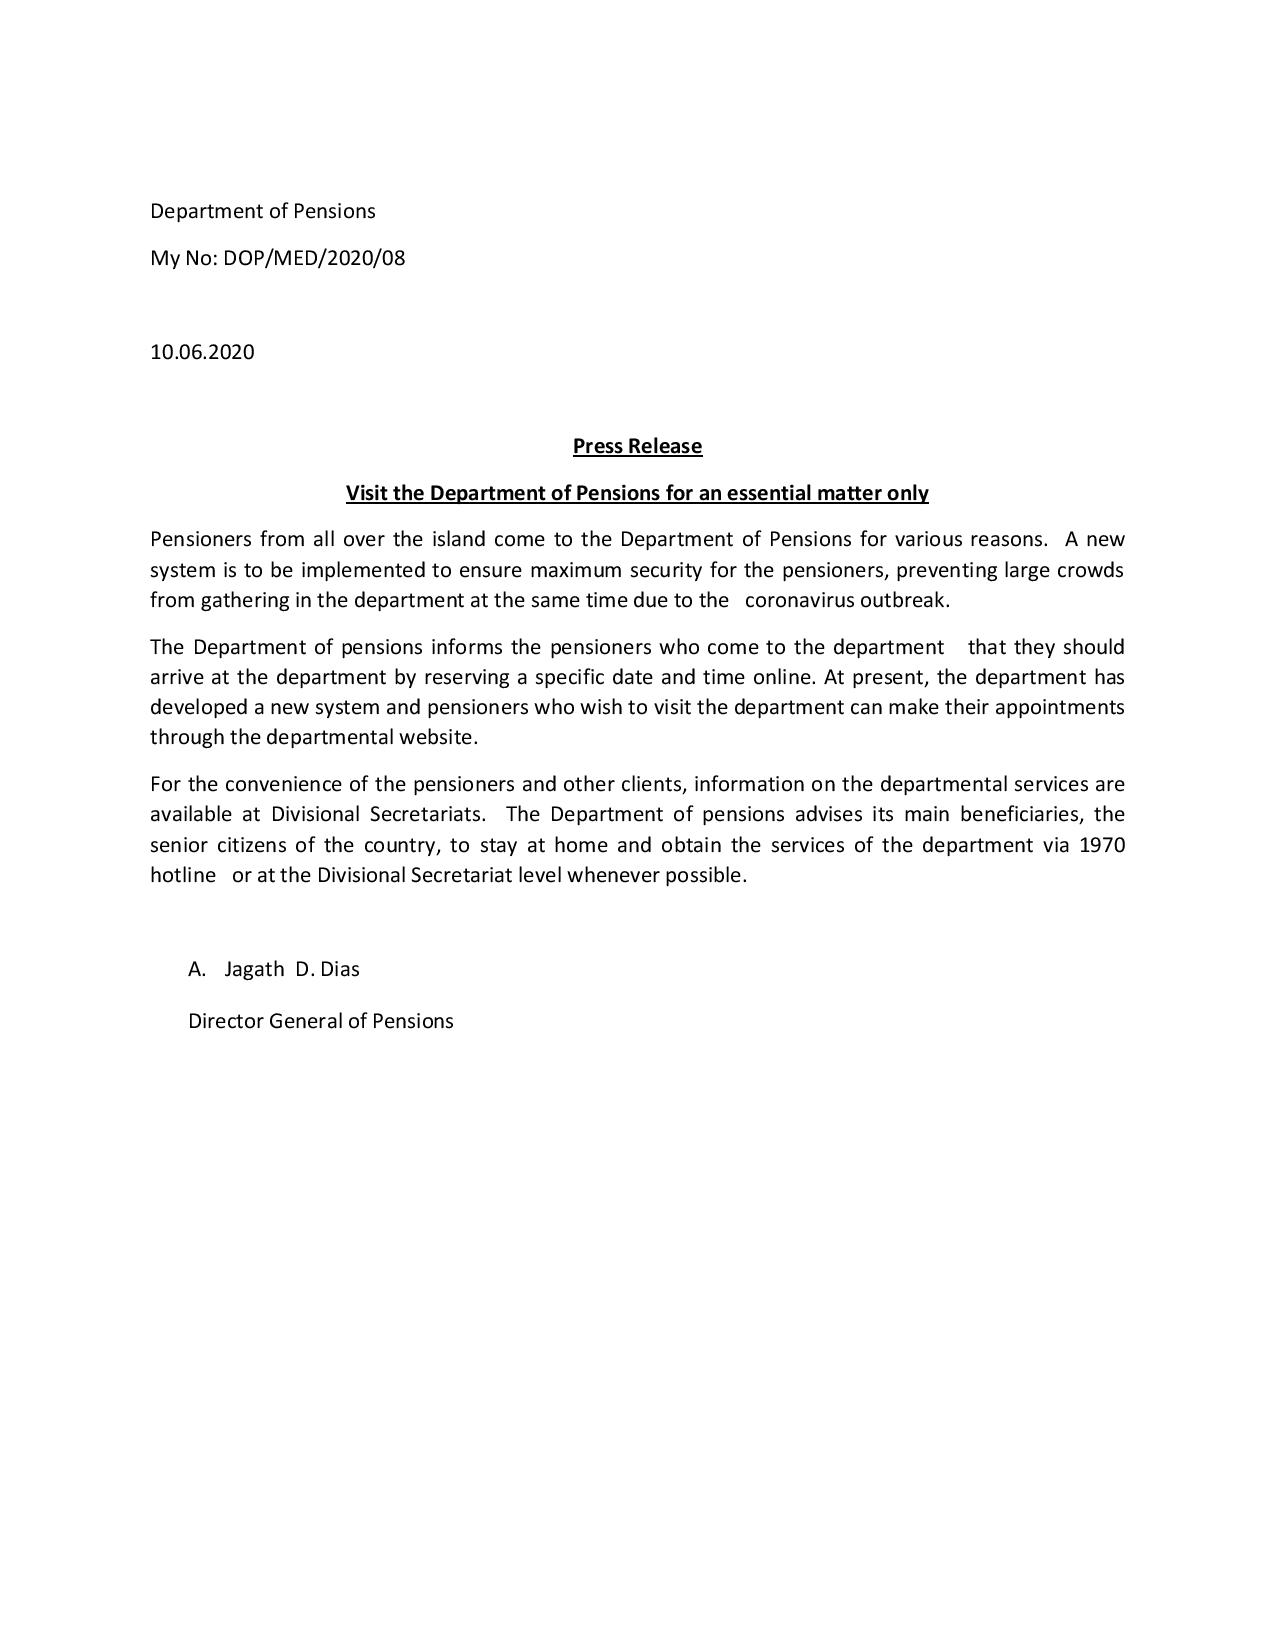 Press Release English Department of Pensions page 002